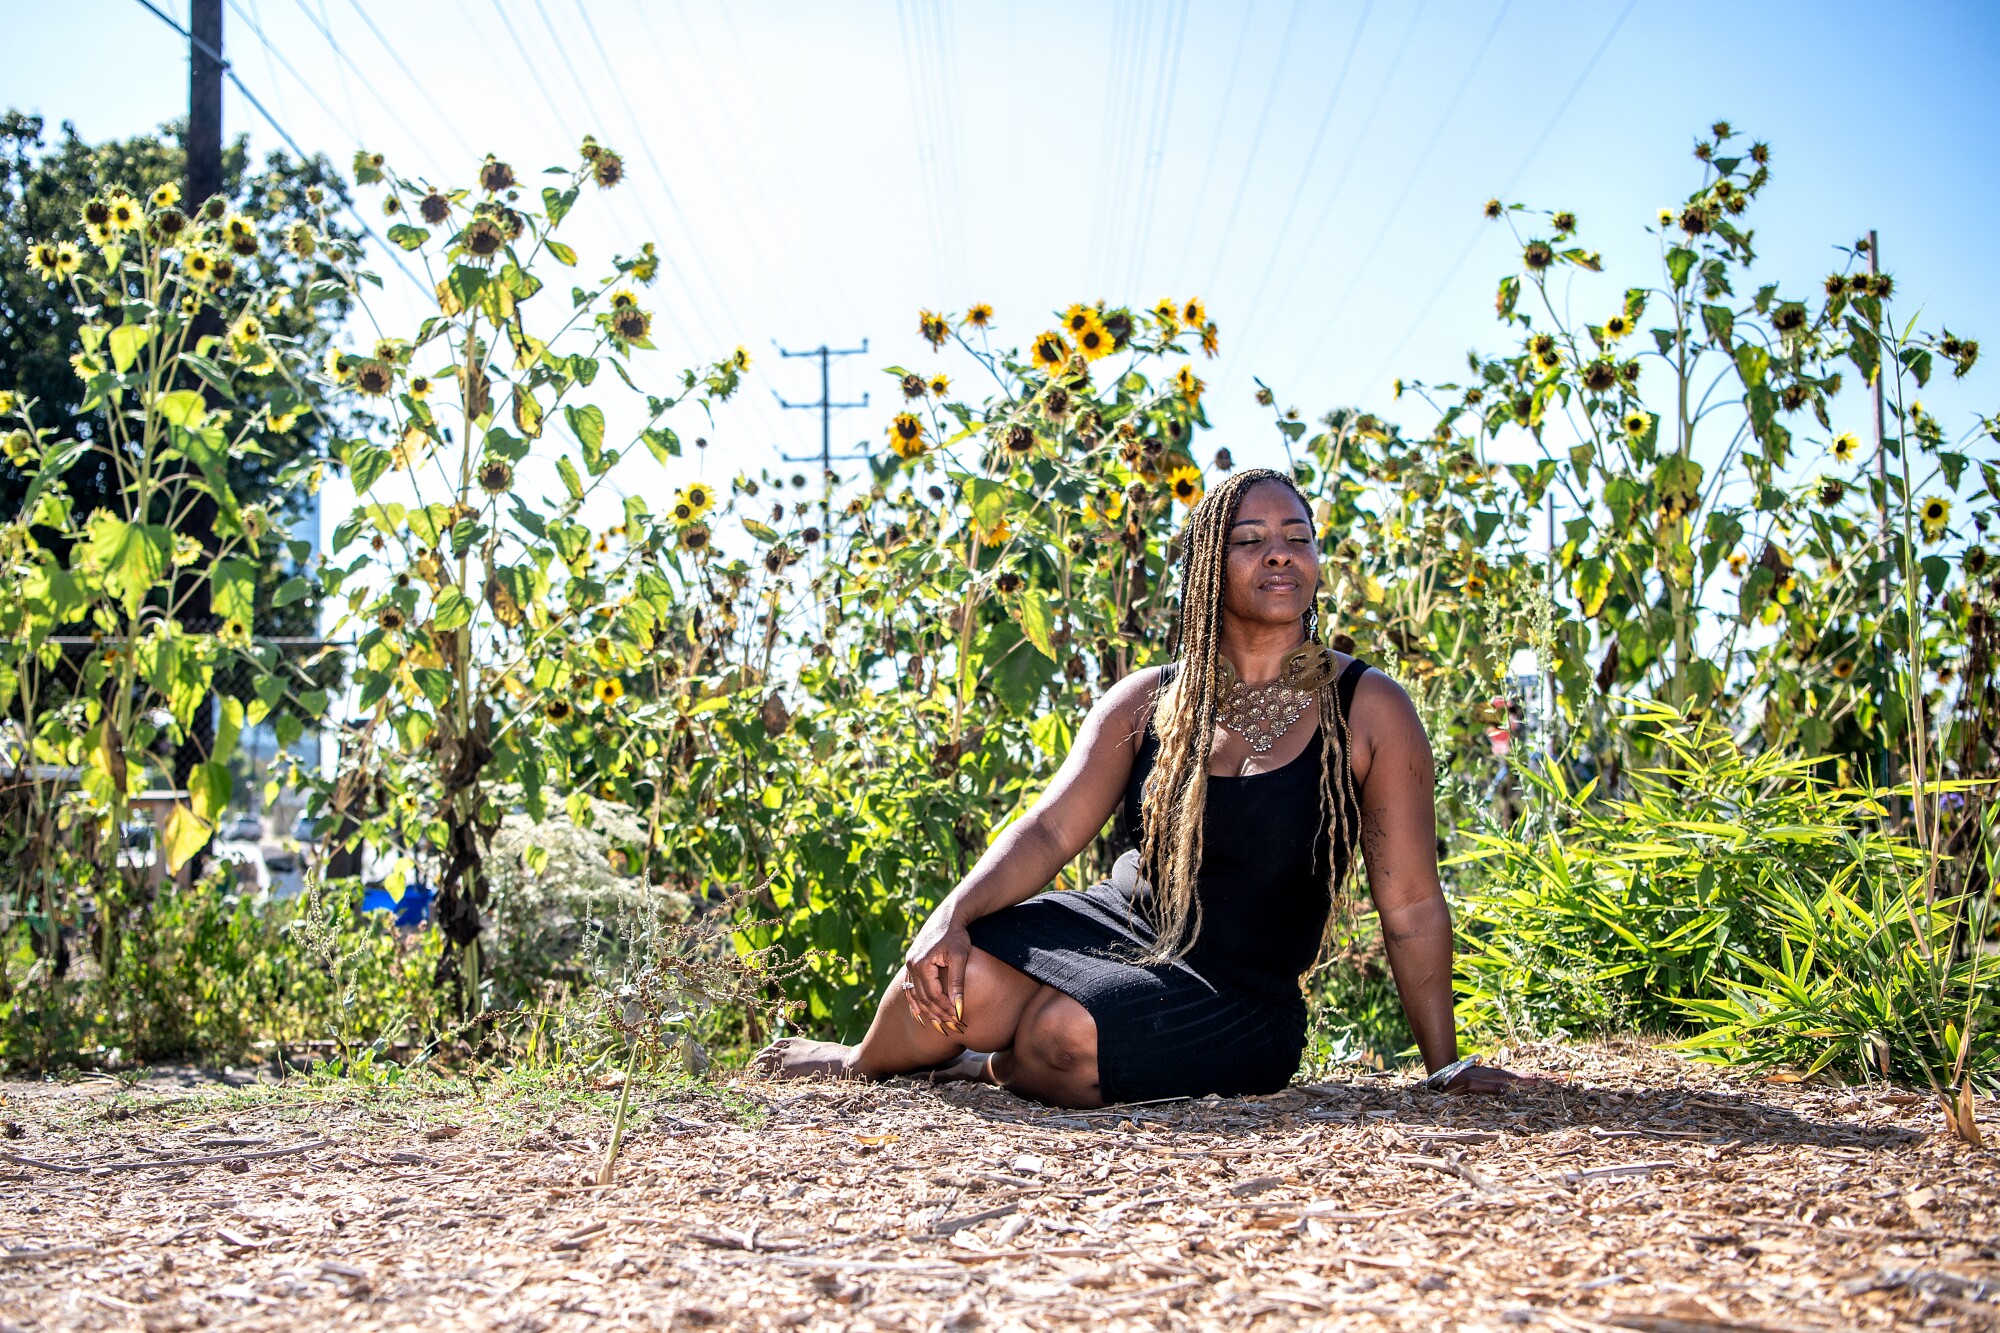 Genea Richardson sits on the ground in a garden, surrounded by sunflowers.